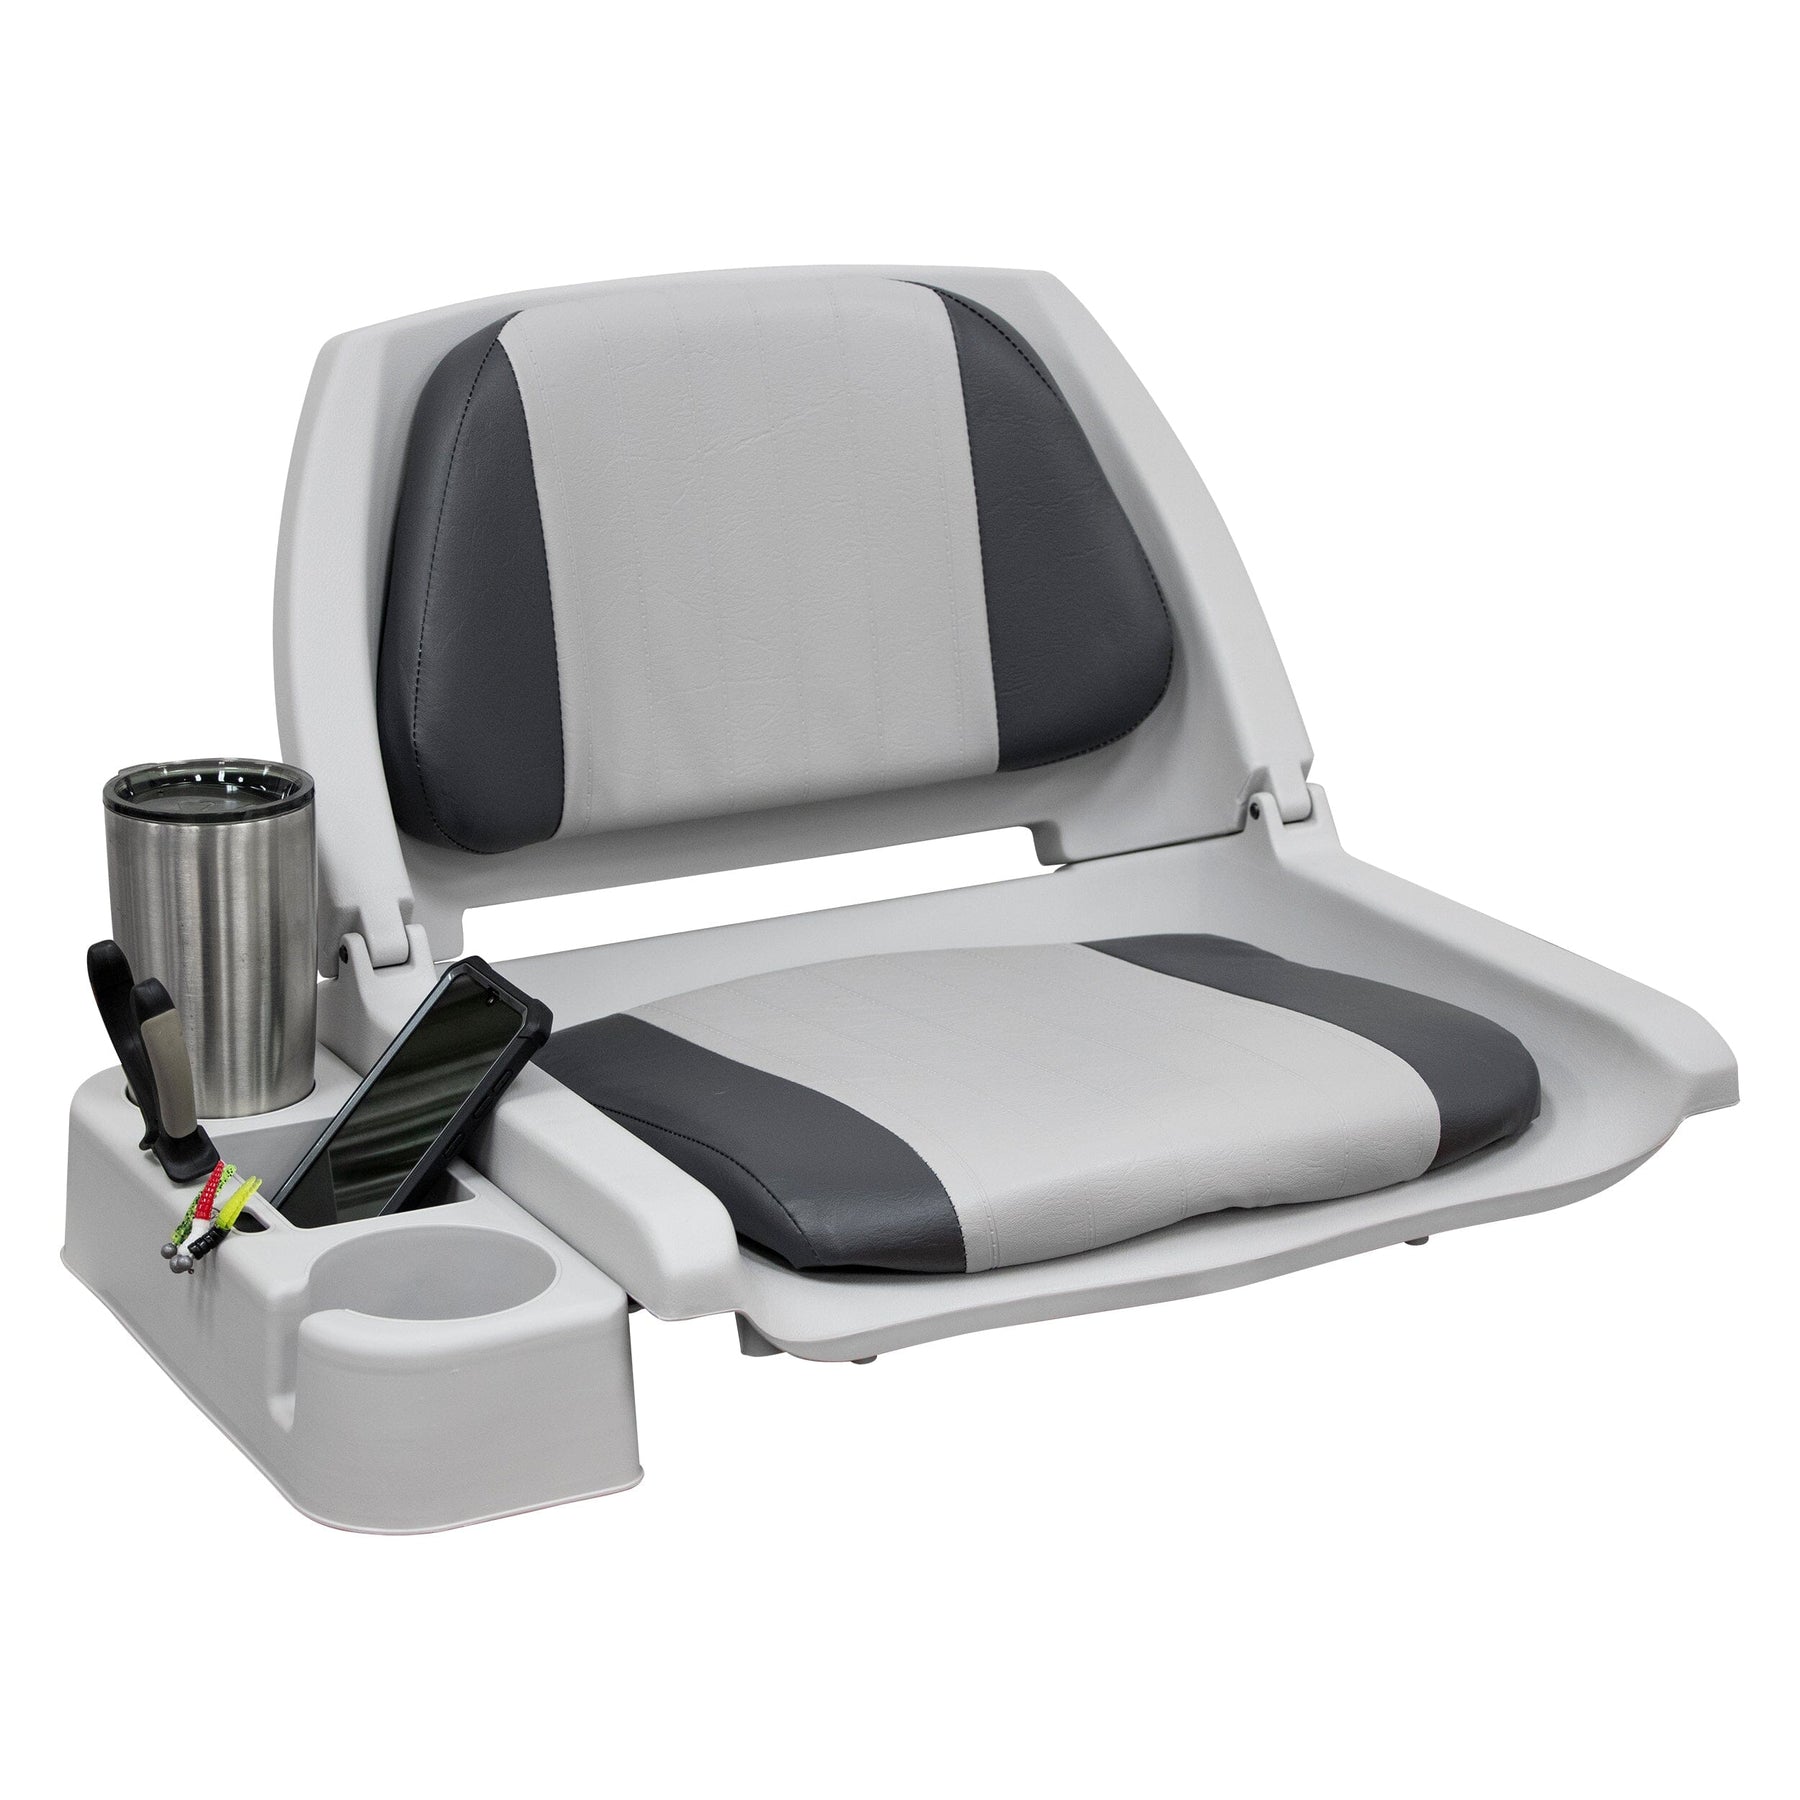 Helm & passenger seats w/molded storage boxes below & 2 fold-down